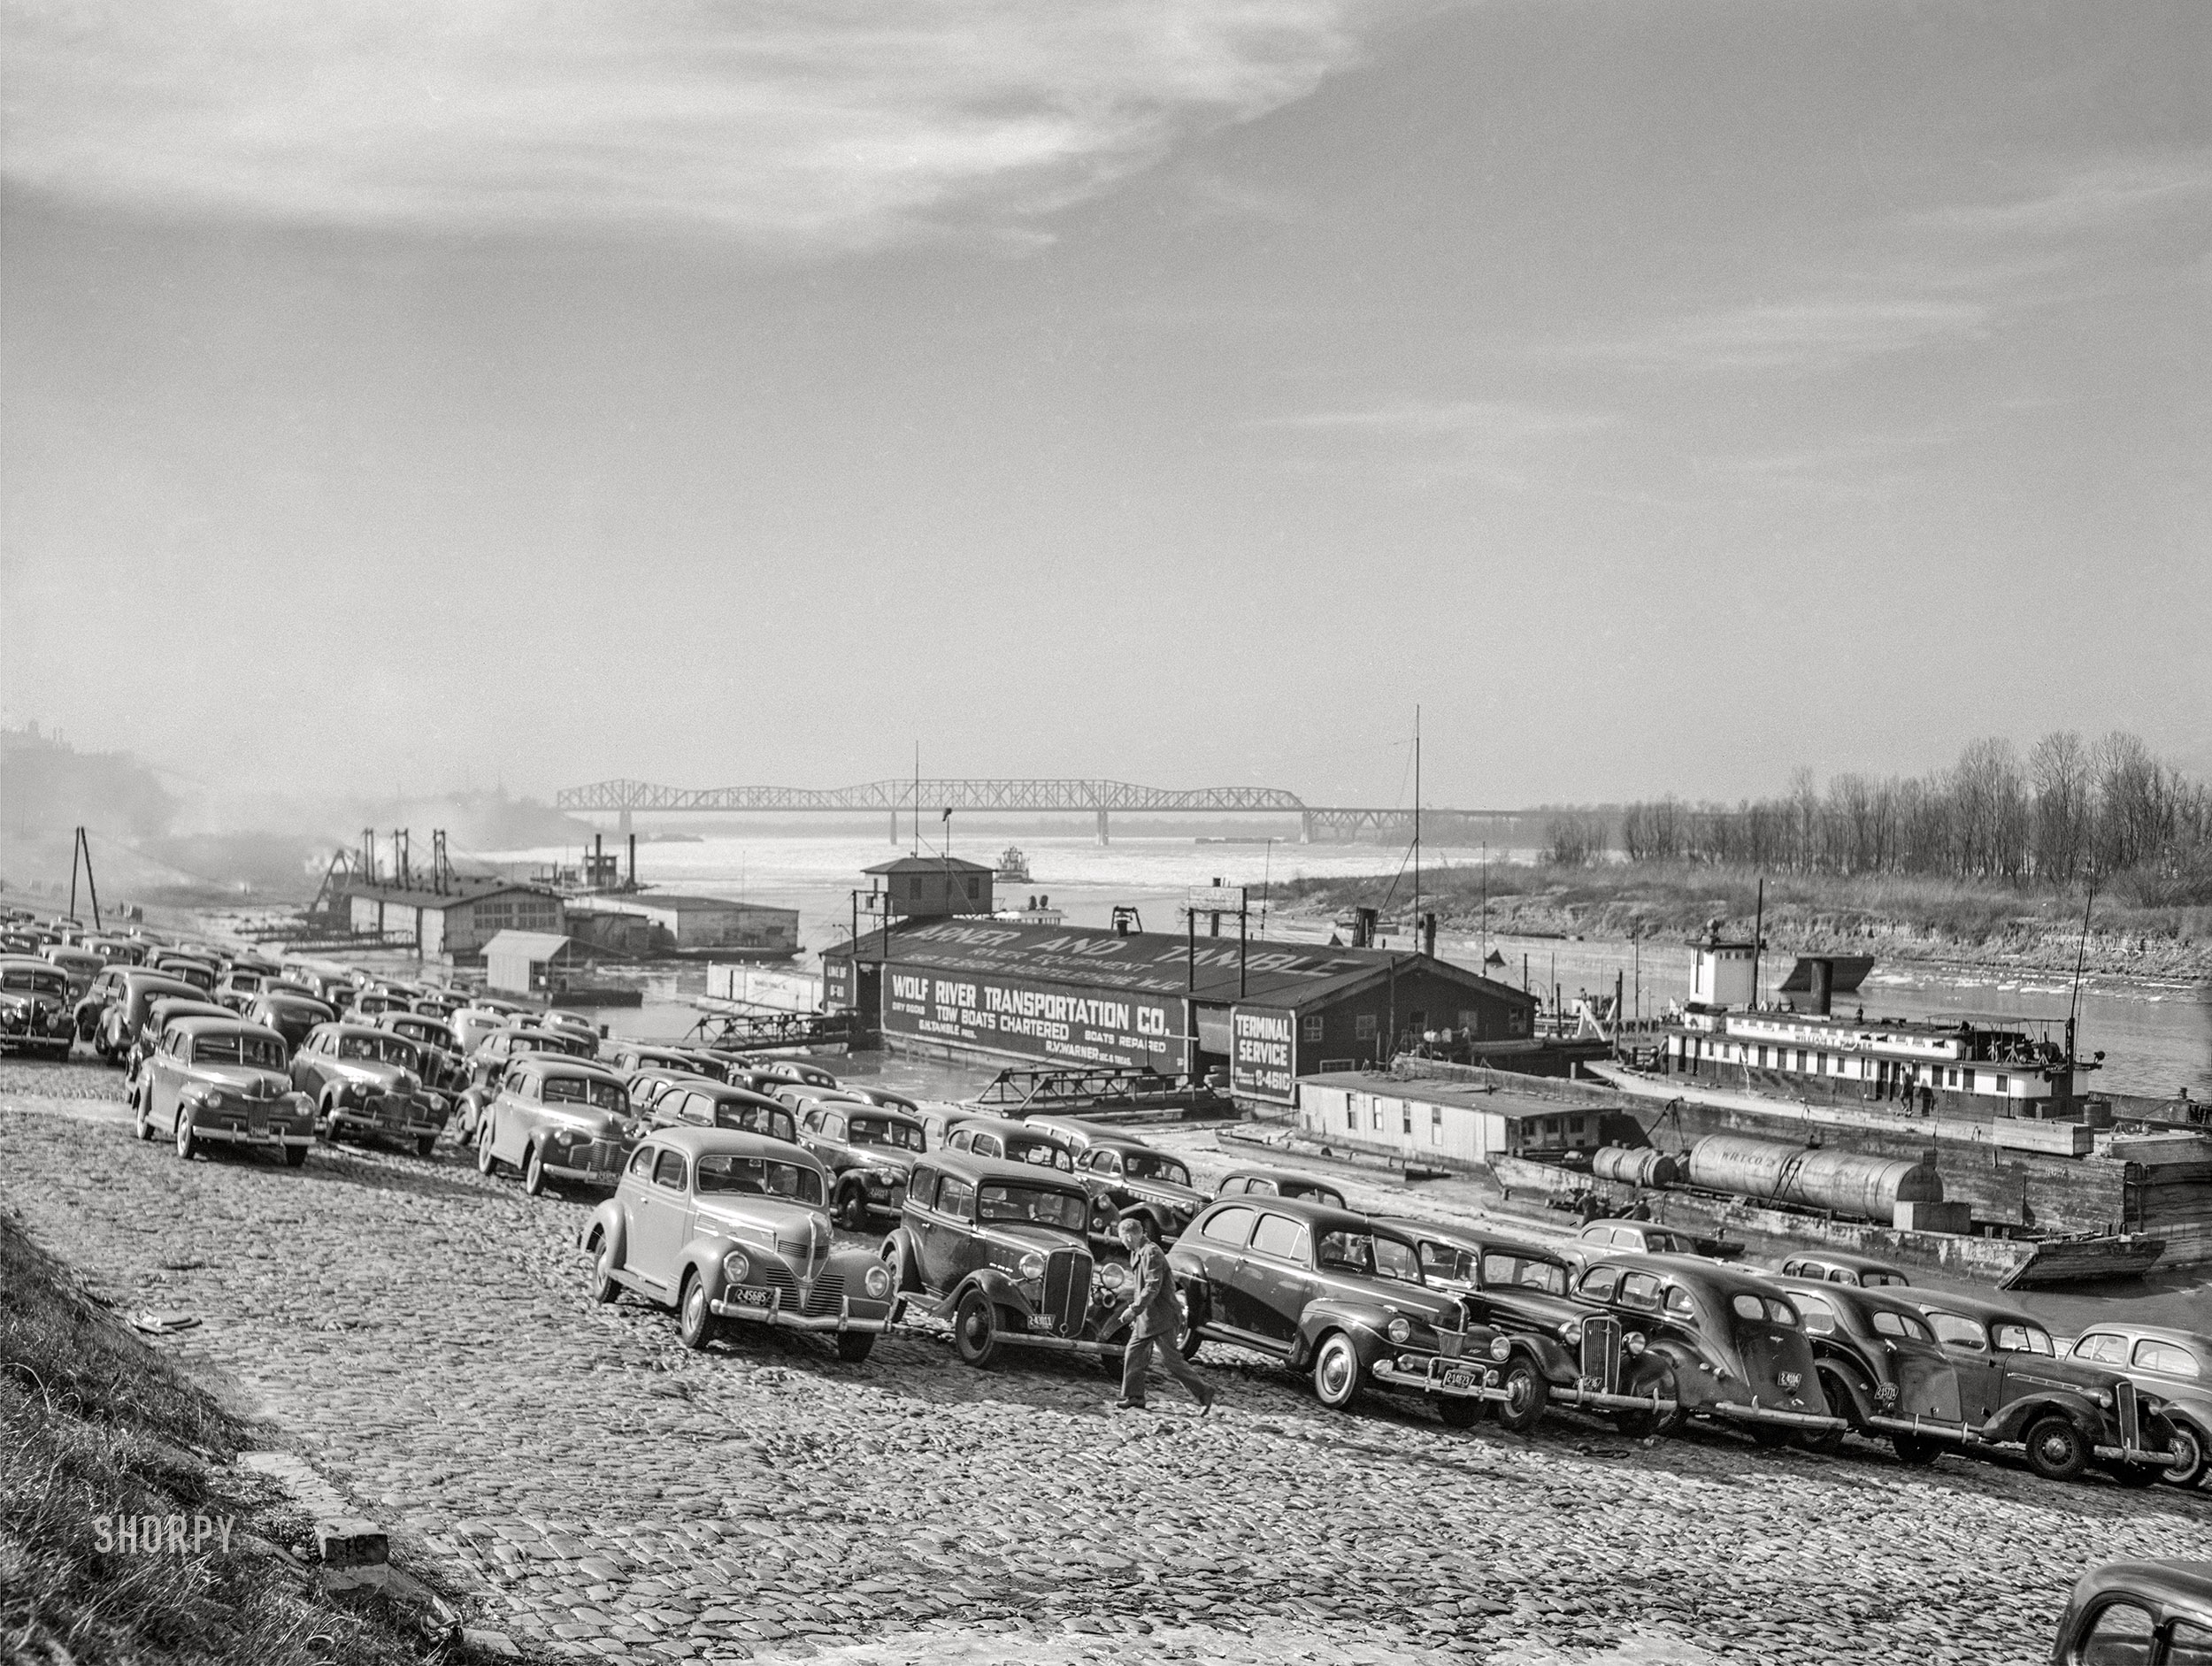 January 1942. "Memphis, Tennessee. Cars parked on Mississippi River levee." Medium format acetate negative by Arthur Rothstein for the Office of War Information. View full size.